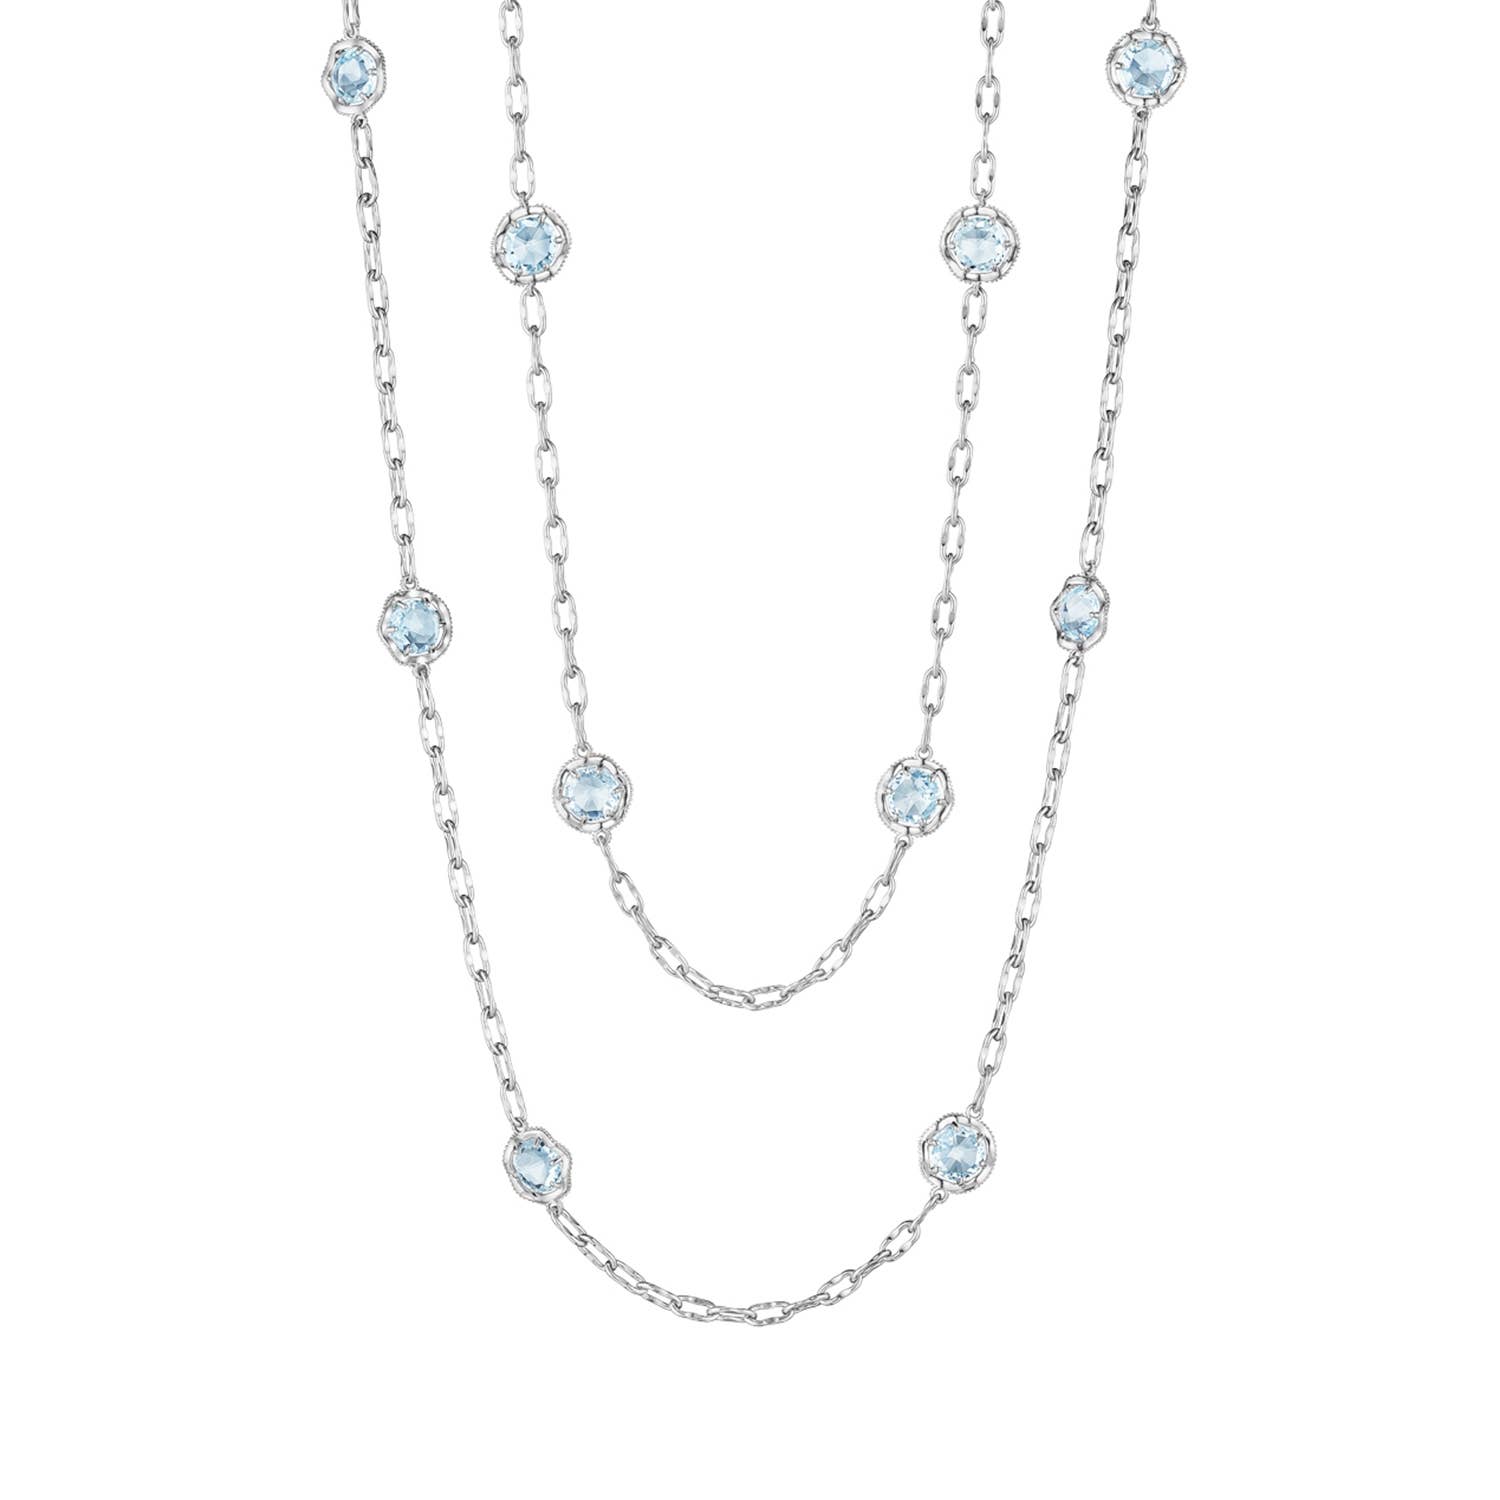 38” Candy Drop Necklace featuring Sky Blue Topaz 